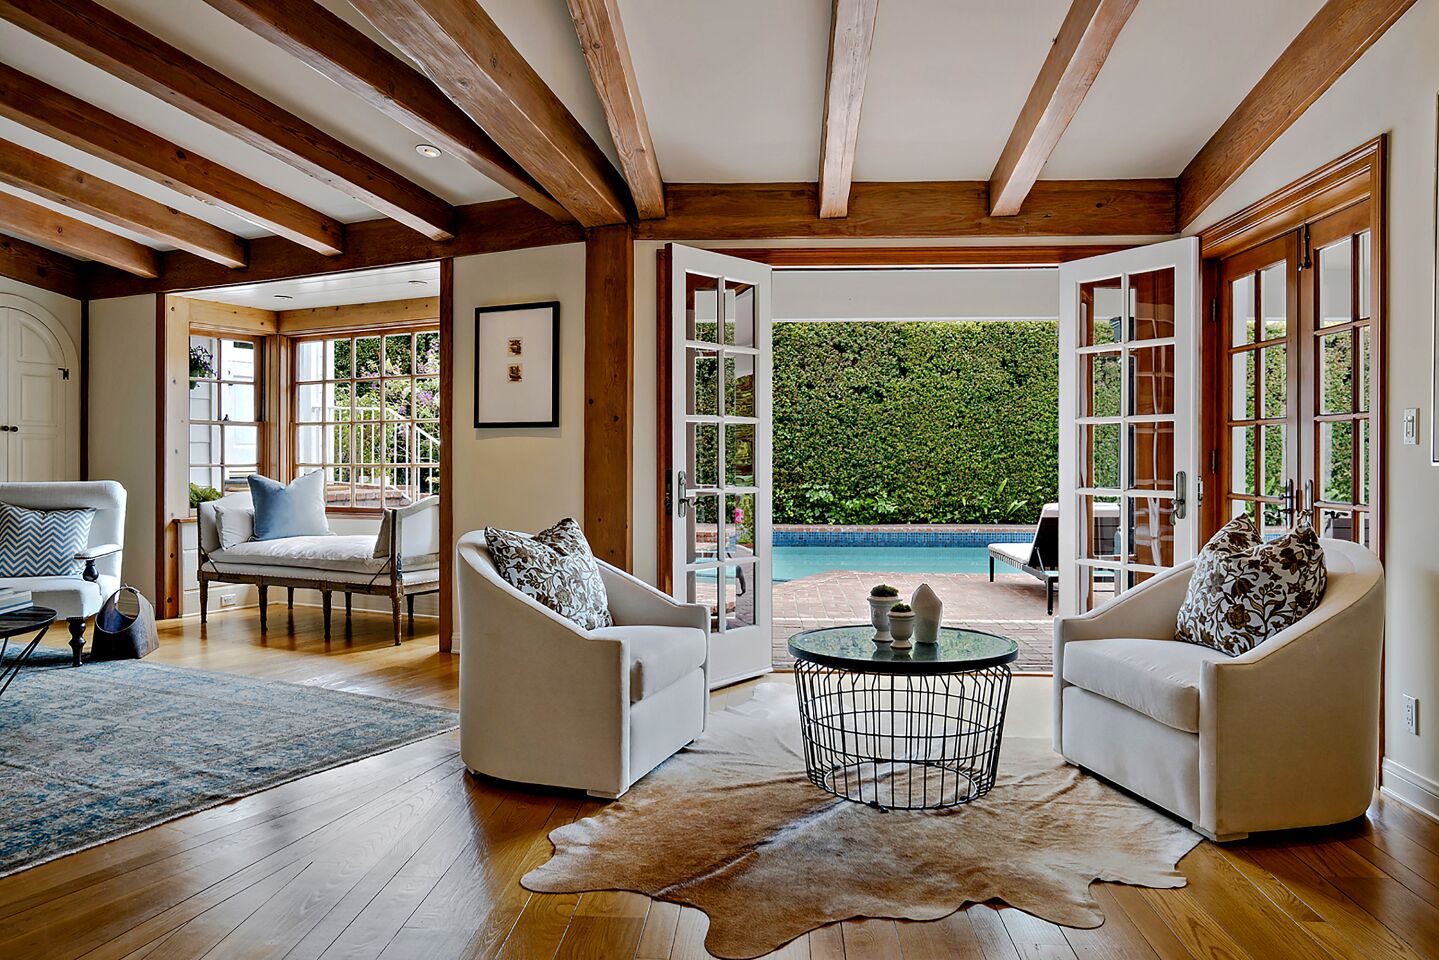 The Country Colonial-style home was once owned by actress Maud Adams.